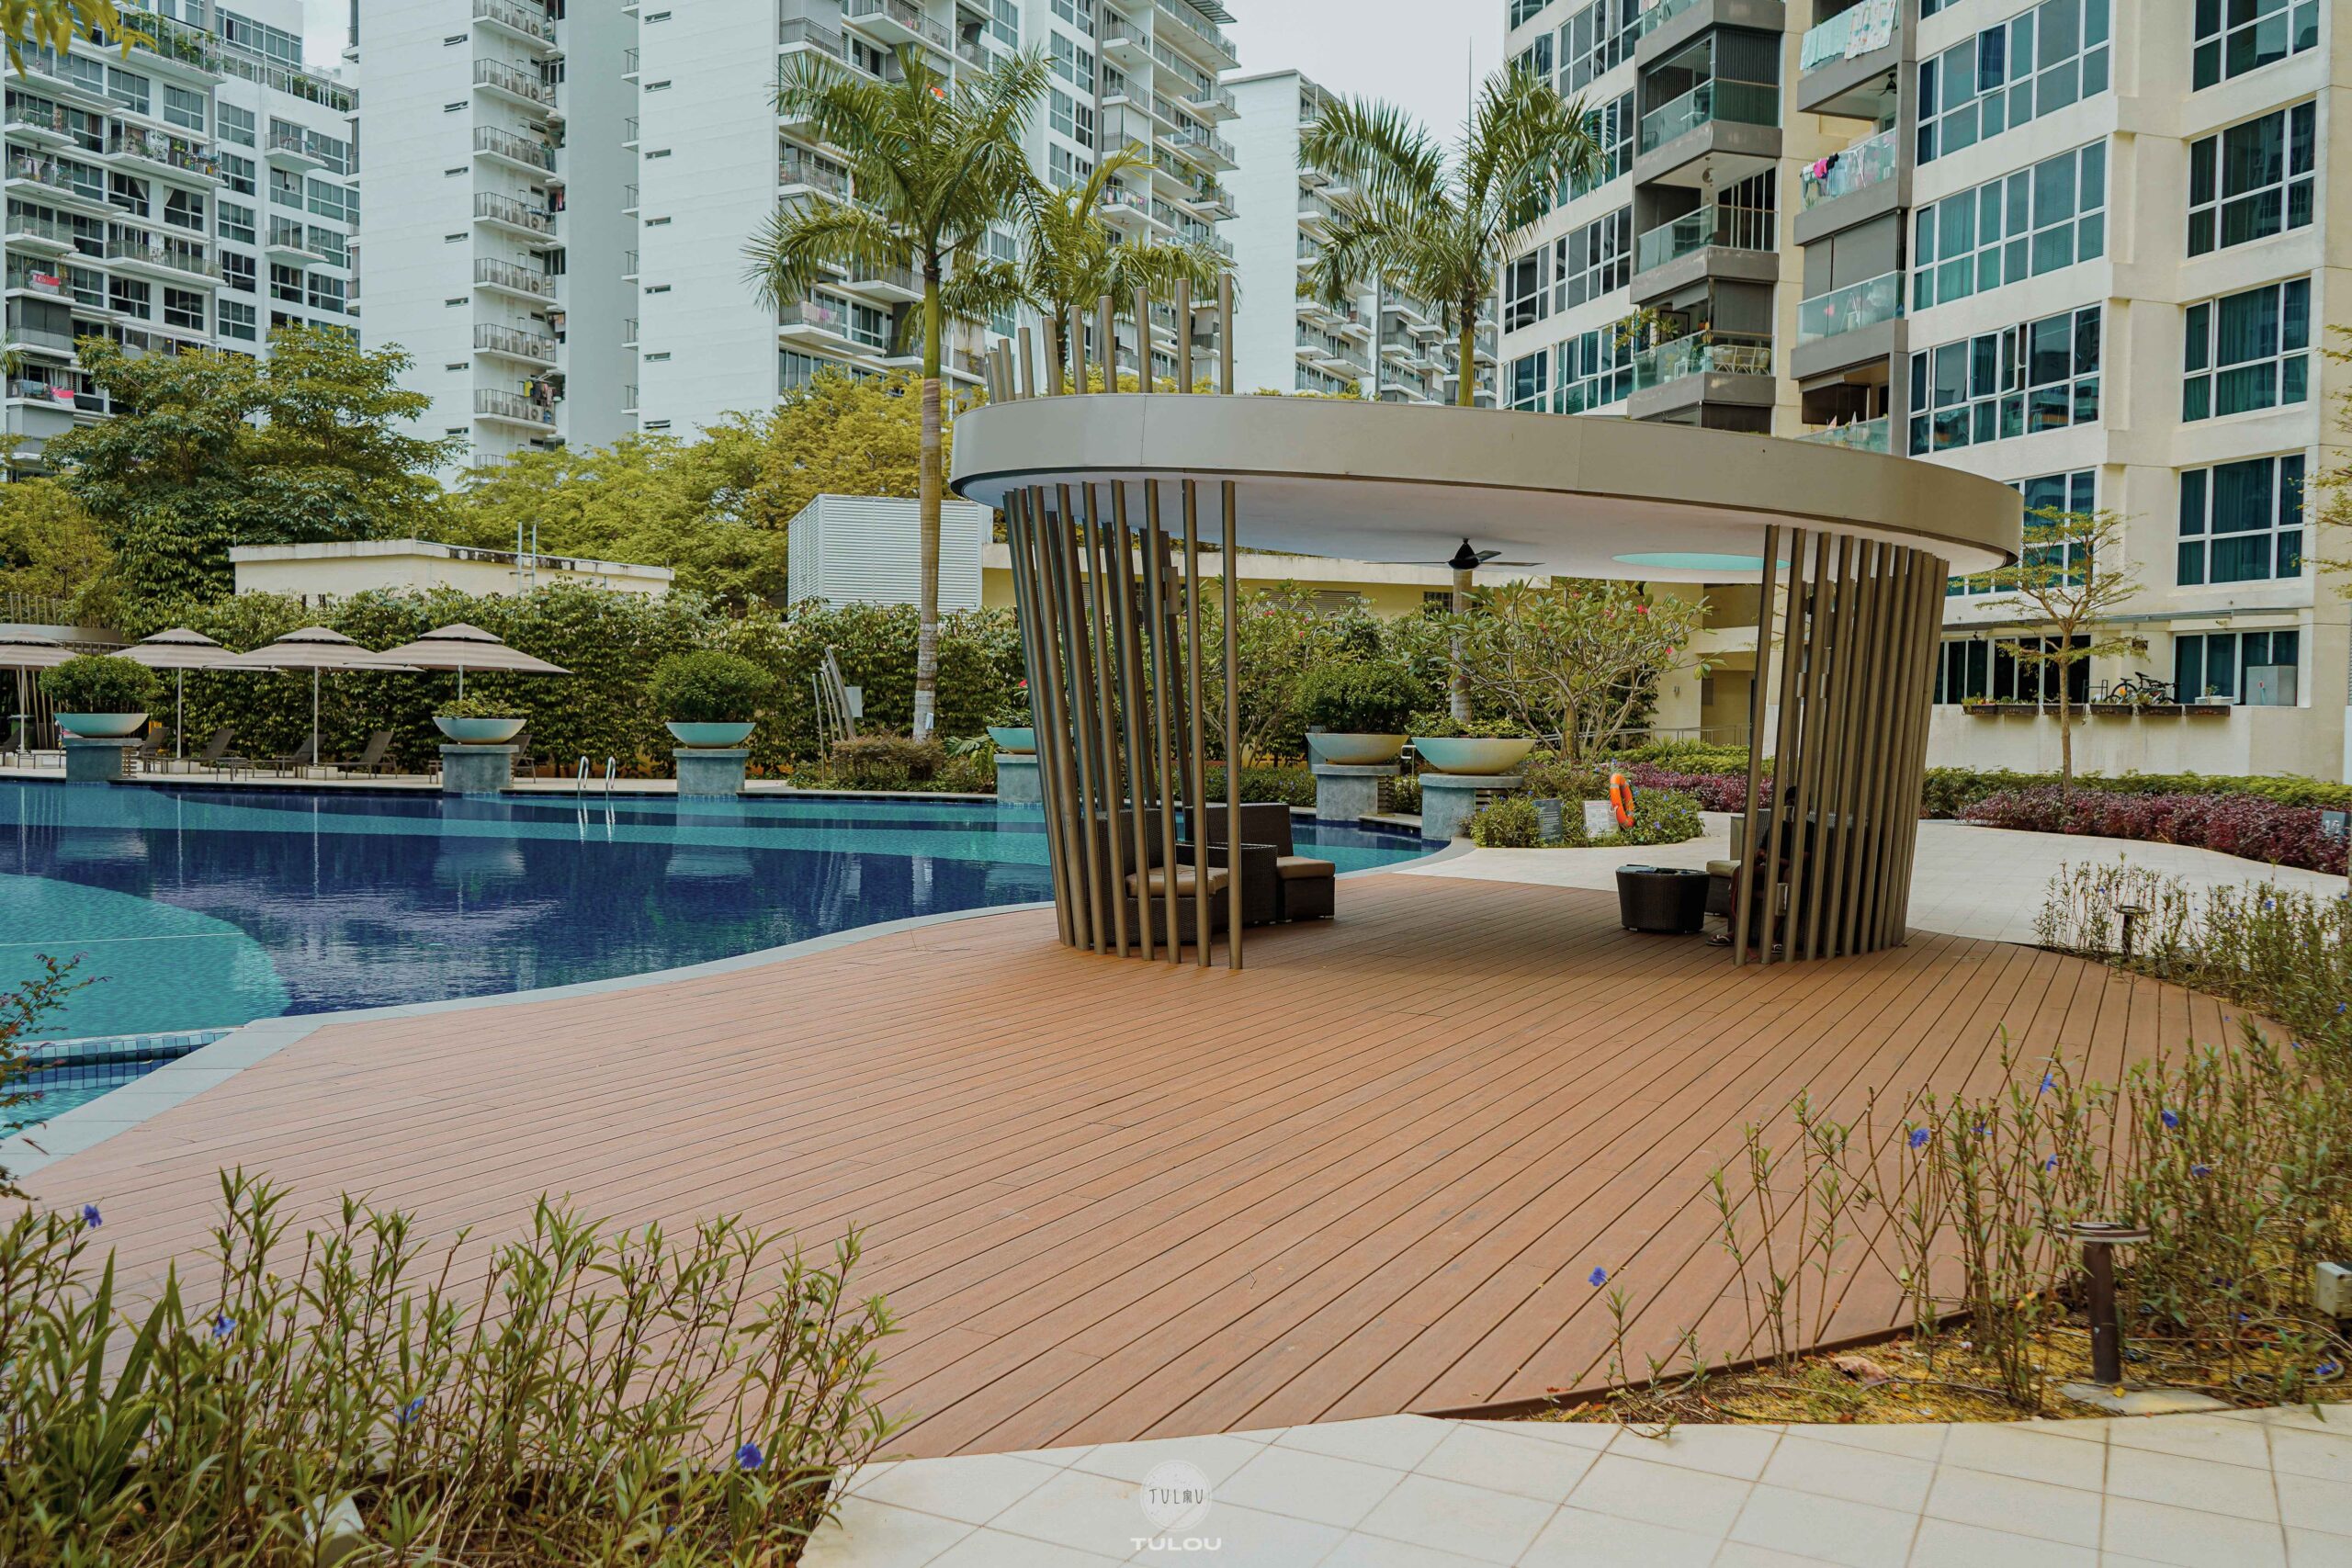 Tulou Composite Timber Decking Singapore Tampines Trilliant 1 scaled - The Tampines Trilliant